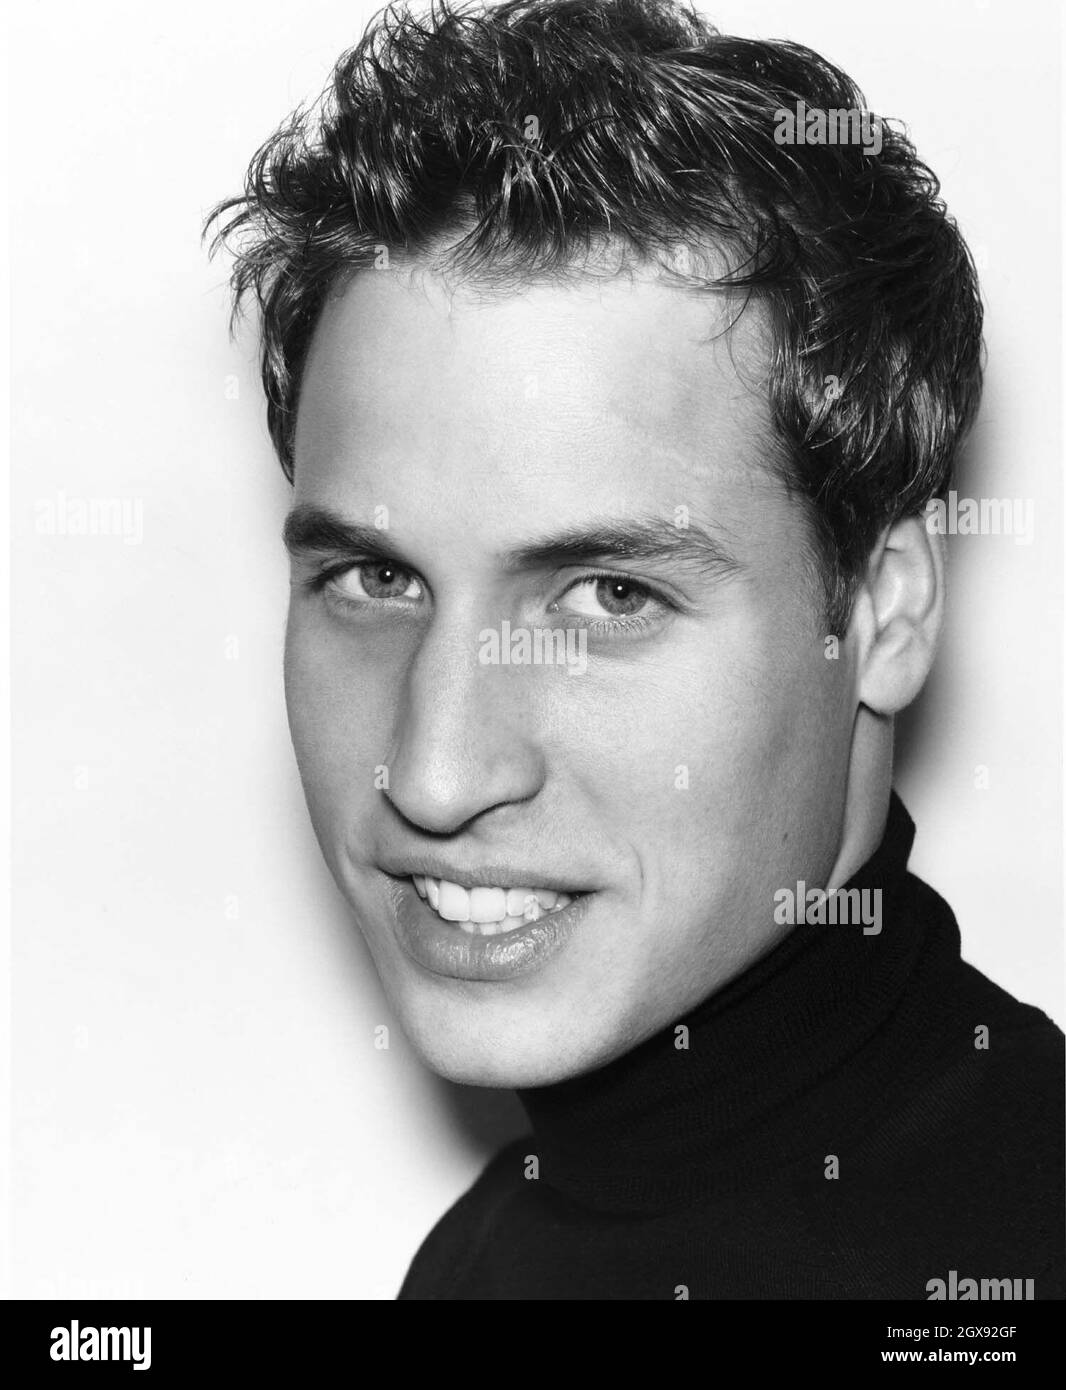 Prince William his 21st Birthday. Â©Anwar Hussein/allaction.co.uk  EMBARGOED:  Not for publication until 0001 Saturday June 21, 2003.   Stock Photo